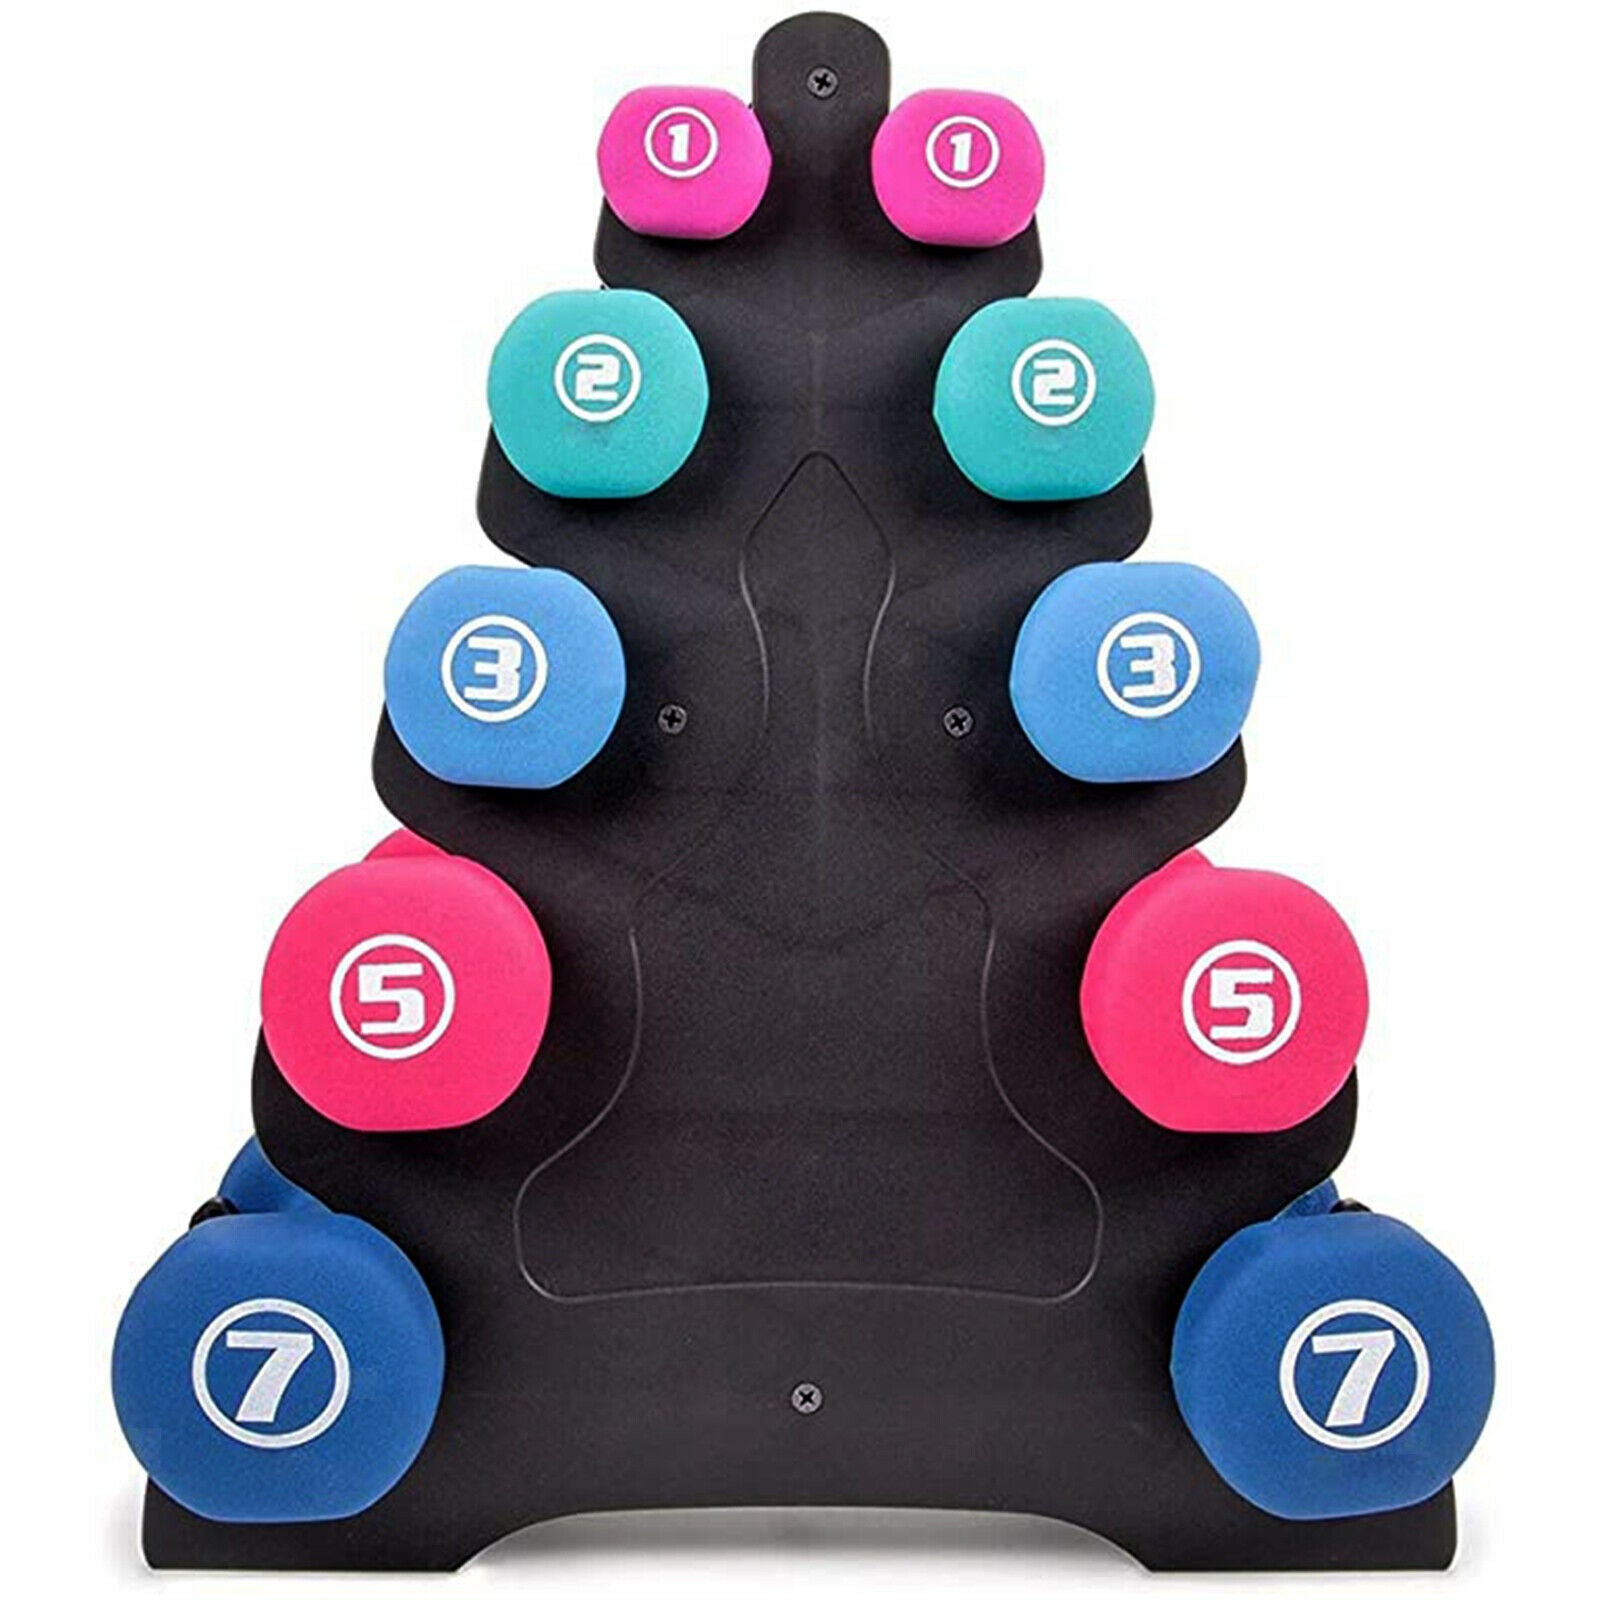 Portable Compact 5 Tier Dumbbell Rack Sport Equipment Home Gym Organizer